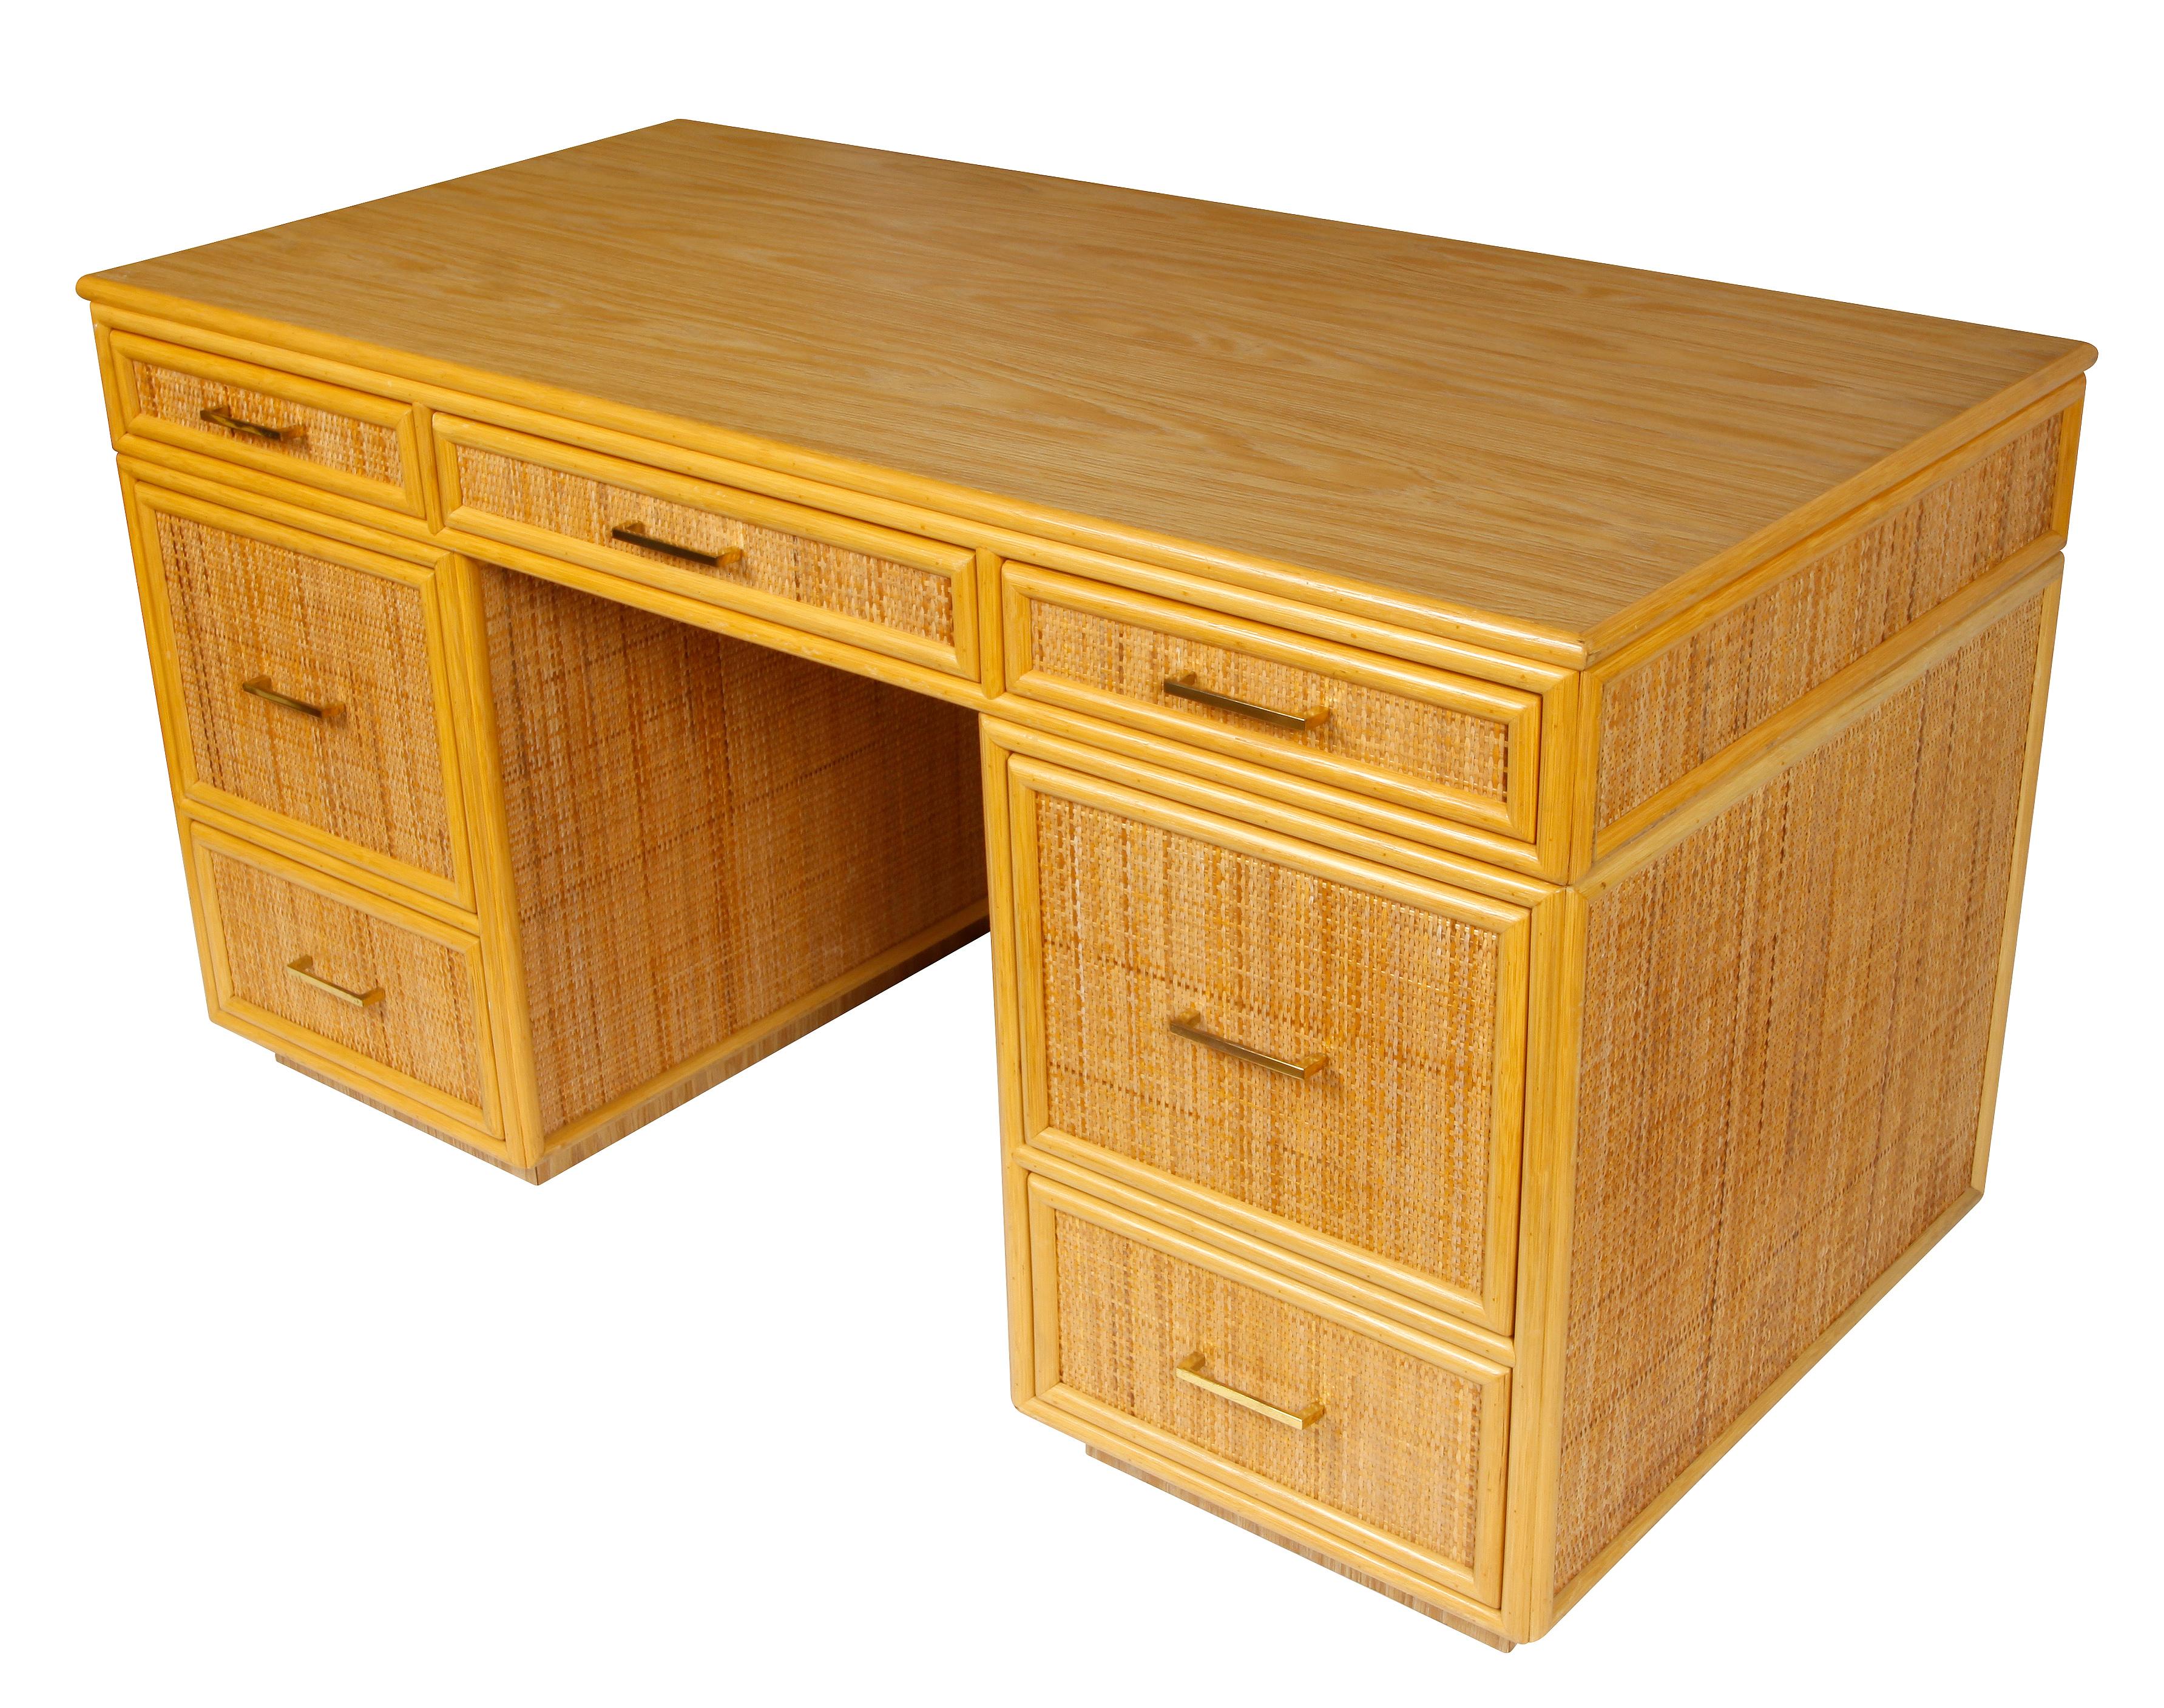 Bielecky rattan partner's desk with seven drawers. Brass drawer pulls and wood grain laminate top.